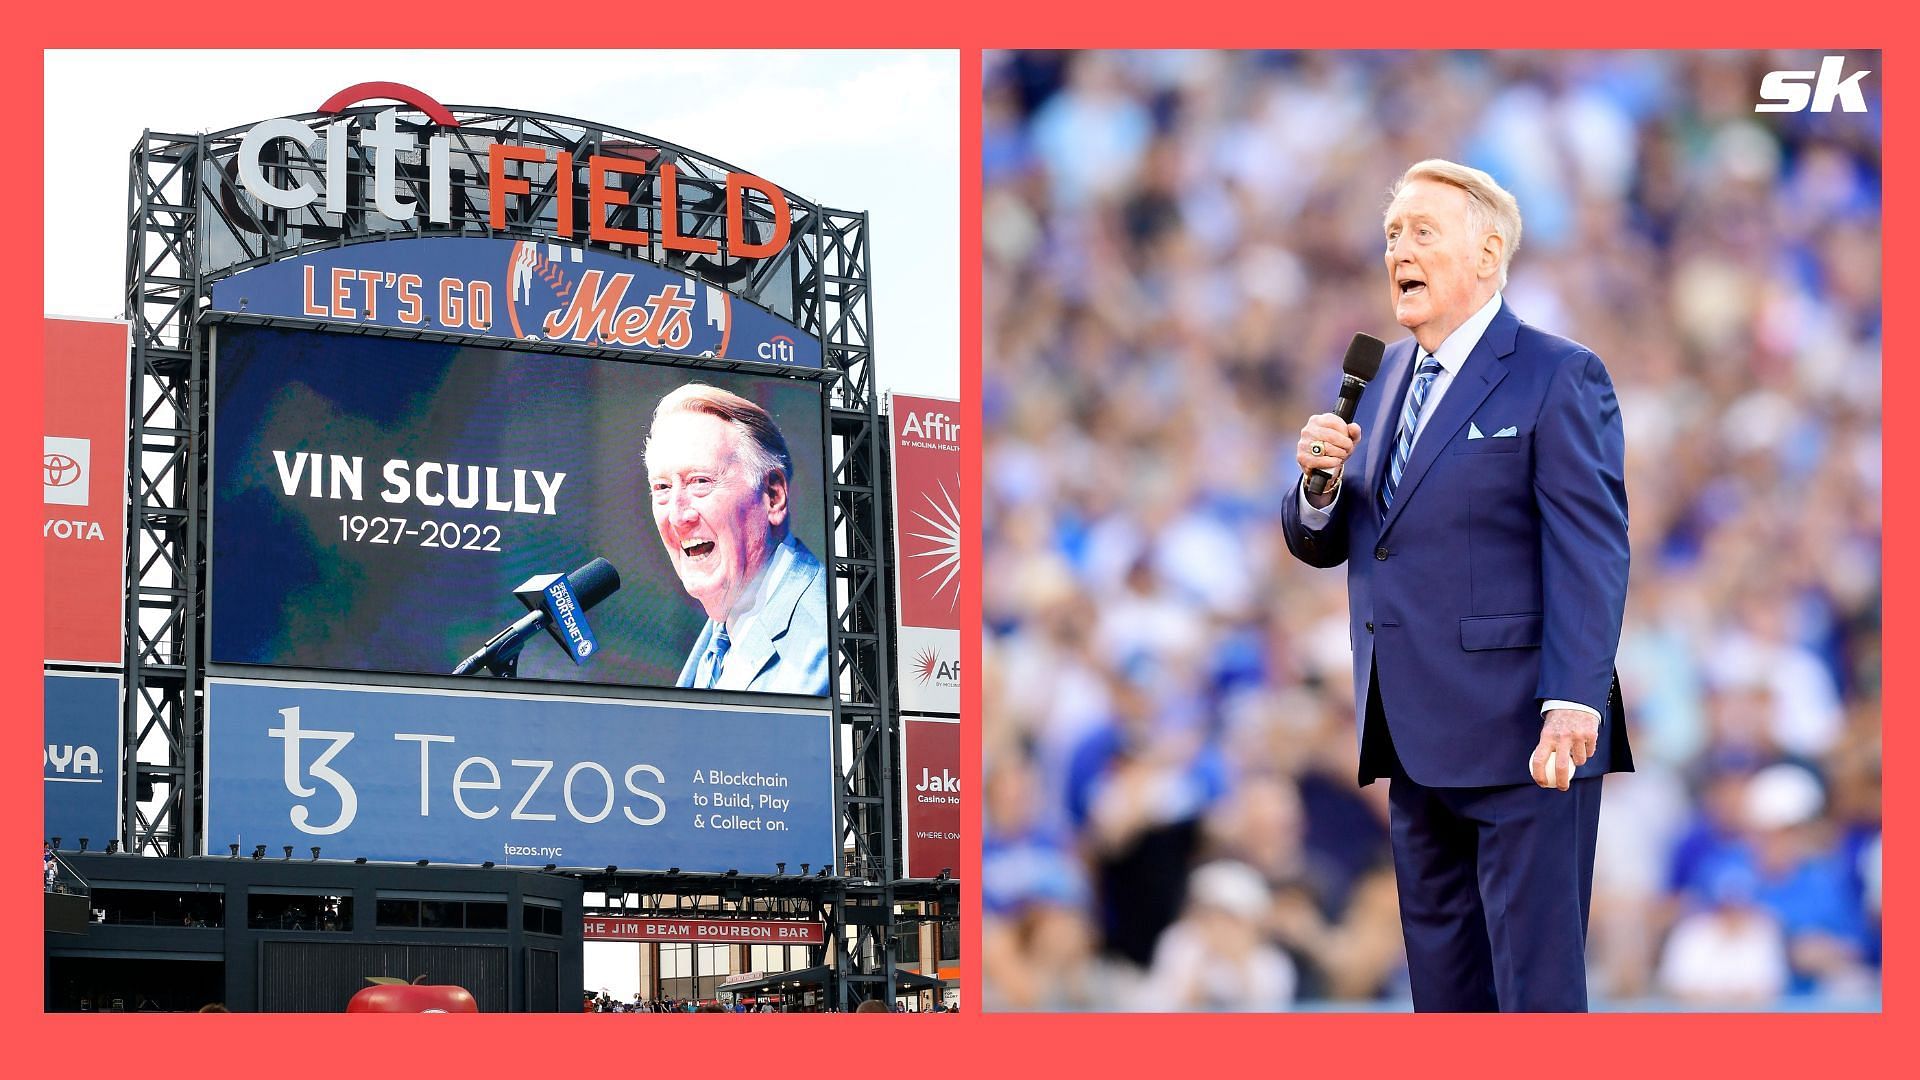 Fact Check: Did Vin Scully call games featuring Connie Mack and Julio Urias?